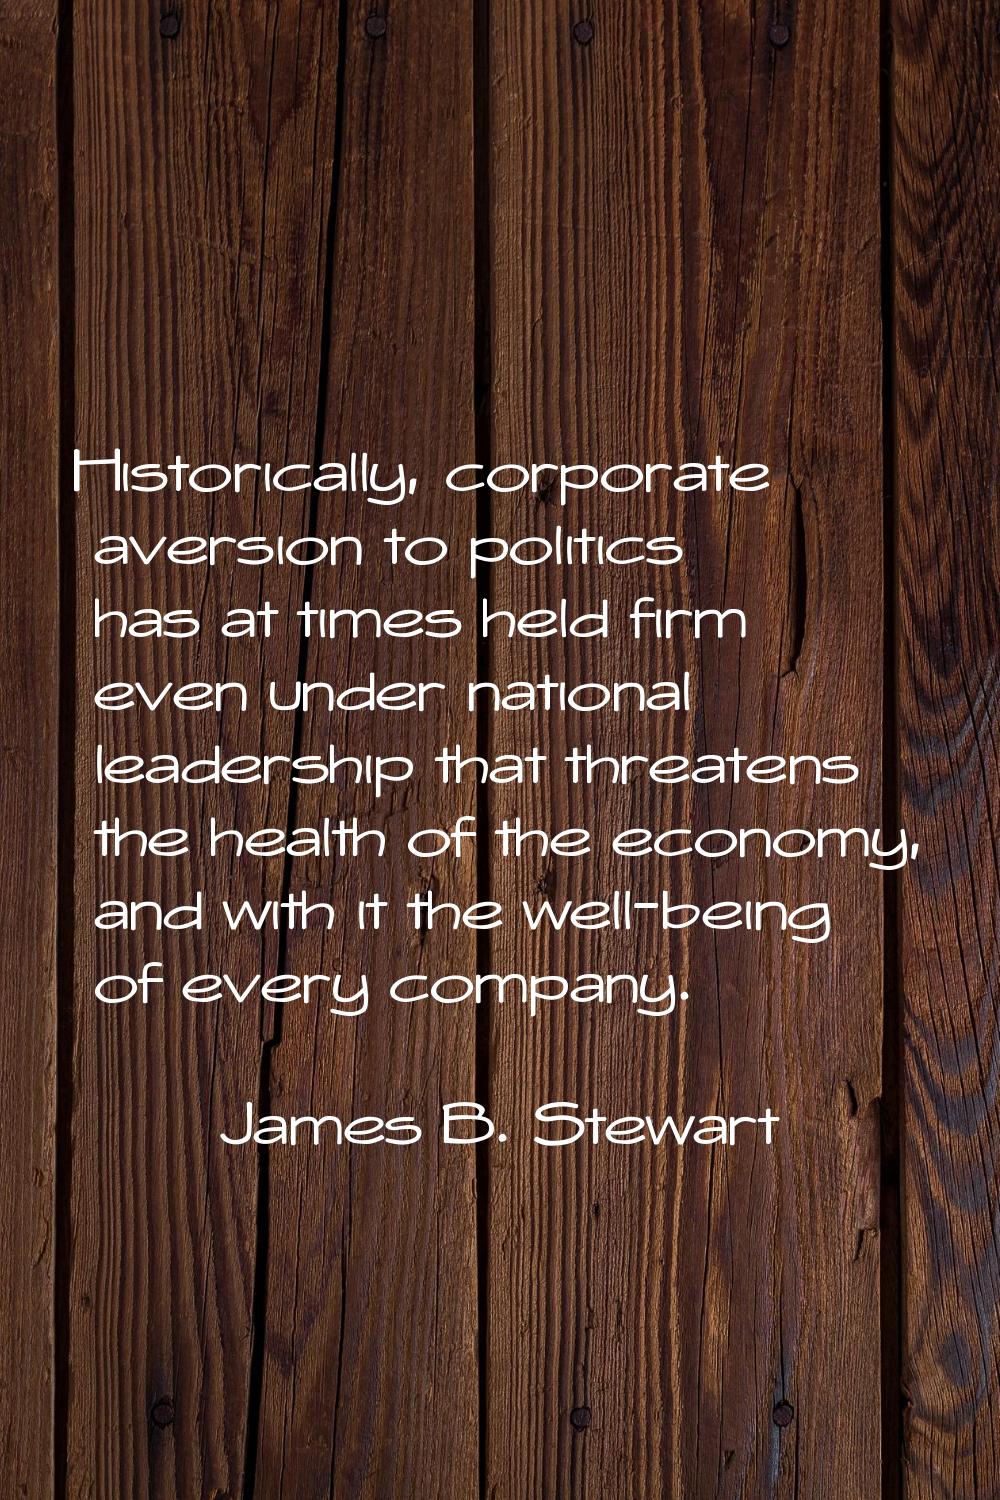 Historically, corporate aversion to politics has at times held firm even under national leadership 